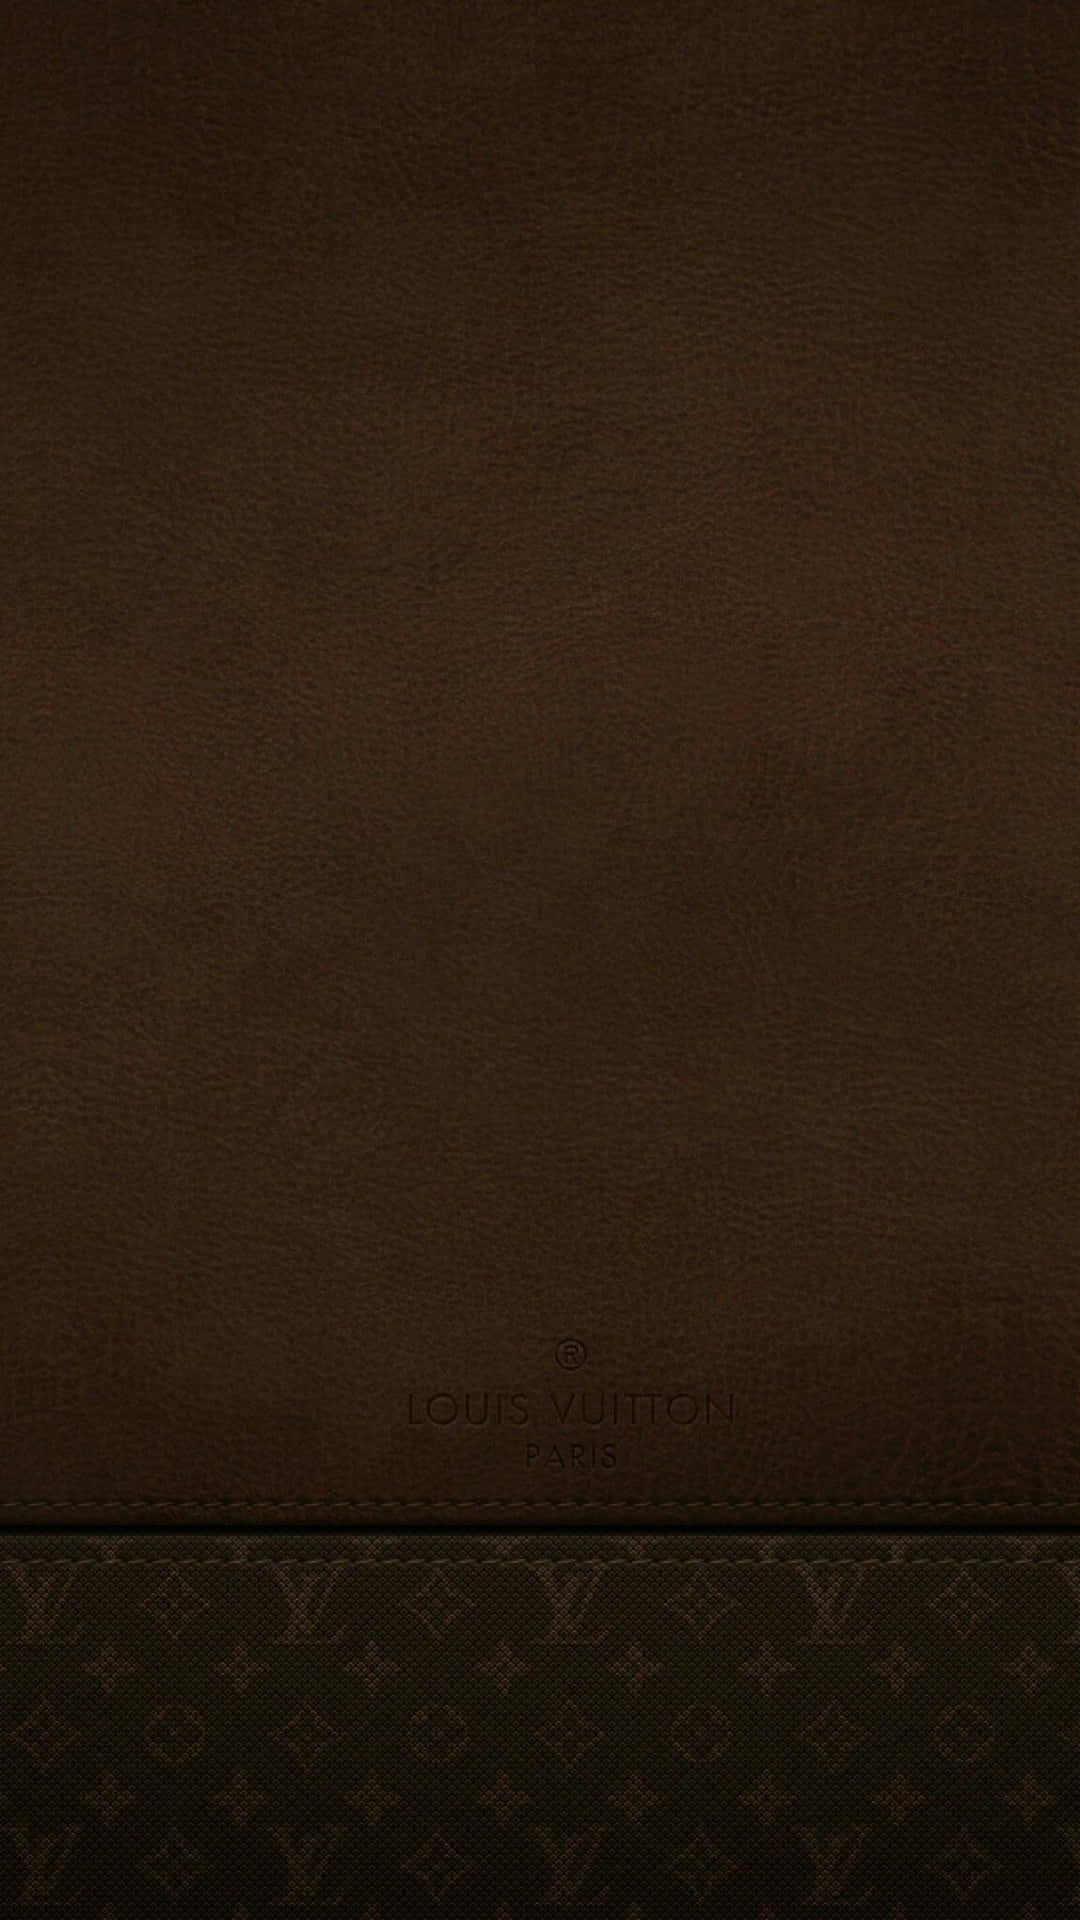 Stylish brown leather texture Wallpaper